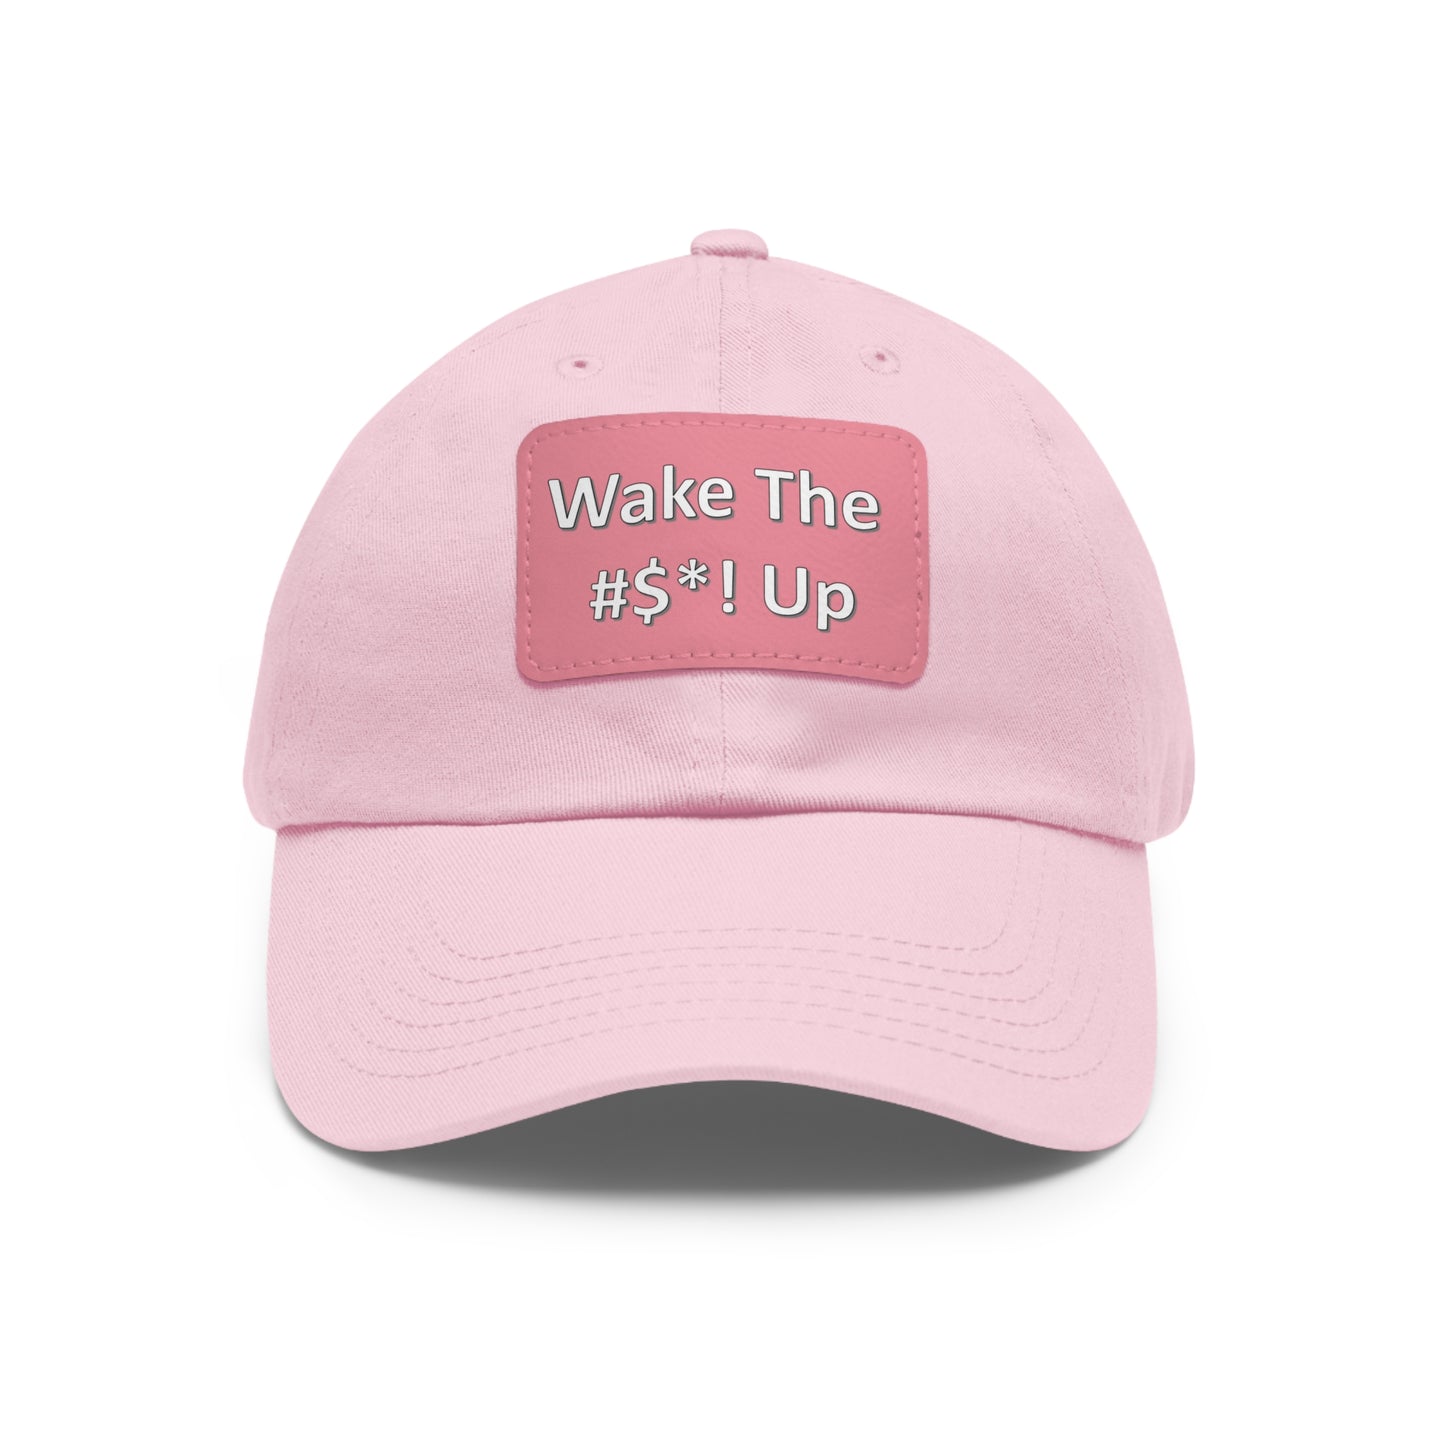 Wake The #$*! Up - Hat with Leather Patch (Rectangle)